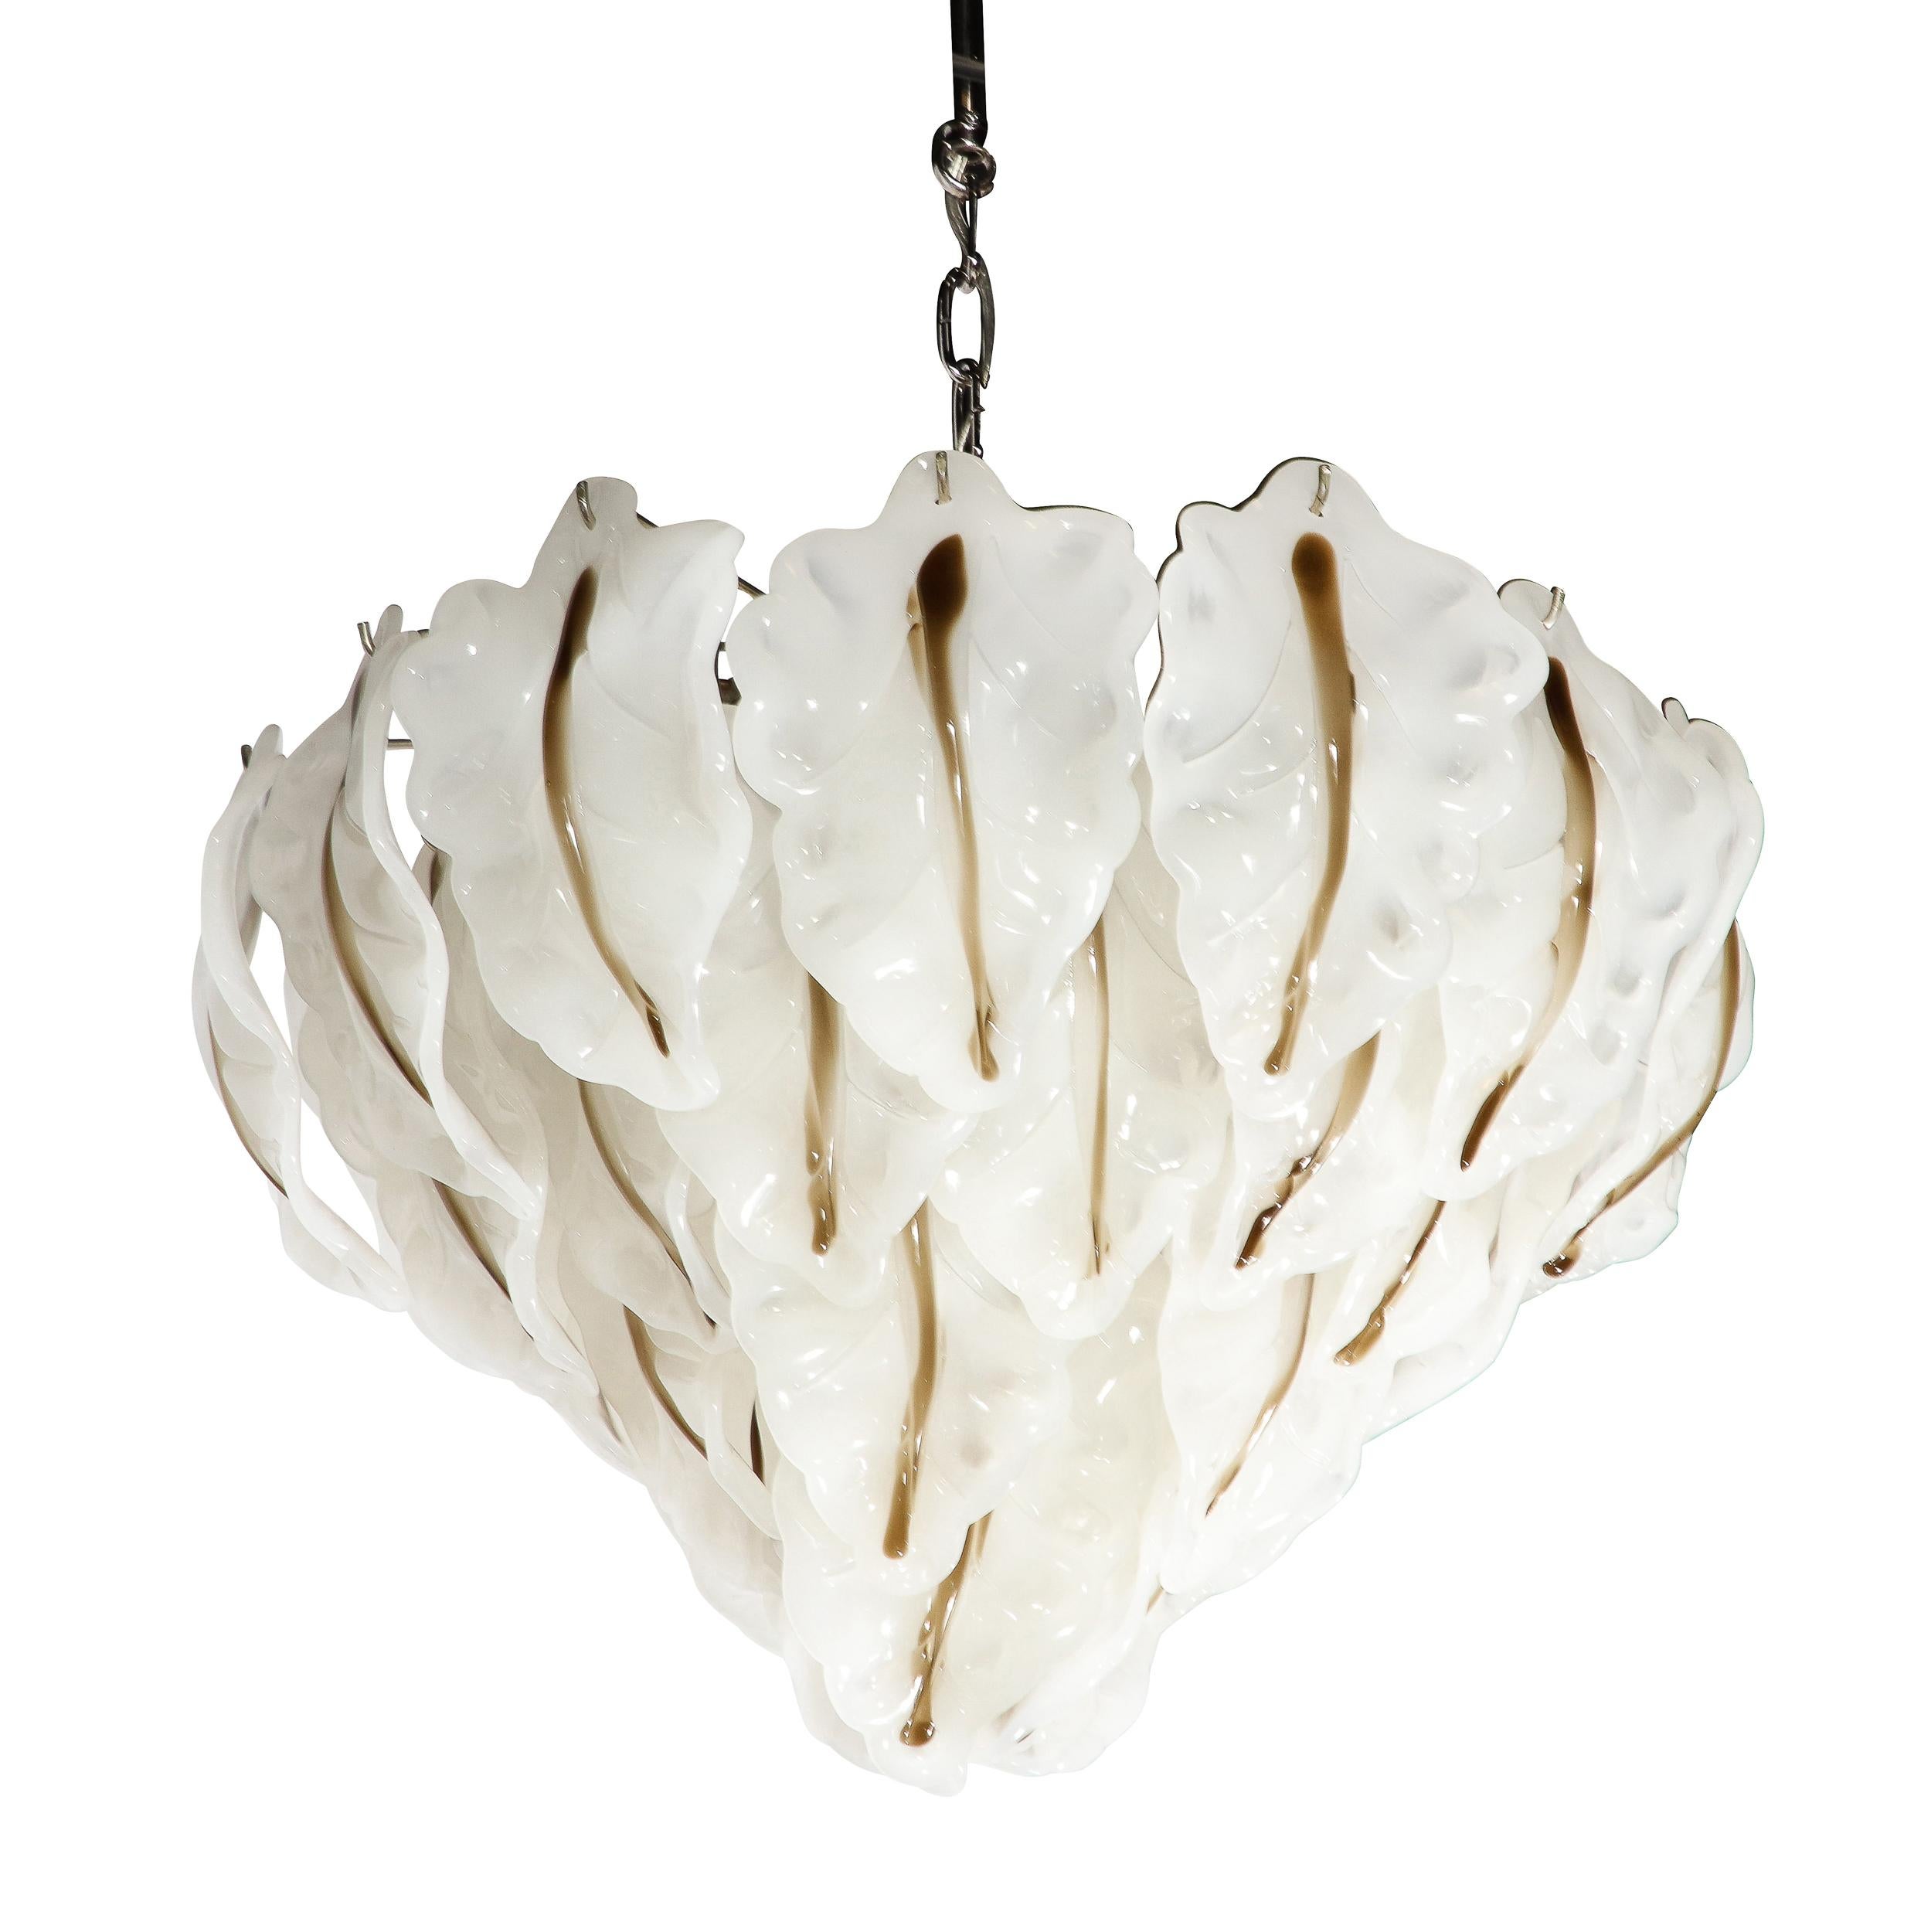 This bold and elegant Mid-Century Modernist Murano Glass Leaf Chandelier by Mazzega originates from Italy, Circa 1970. Features four graduated tiers of Hand-Blown leaf form glass elements in white with a subtle line of raw umber along the center of